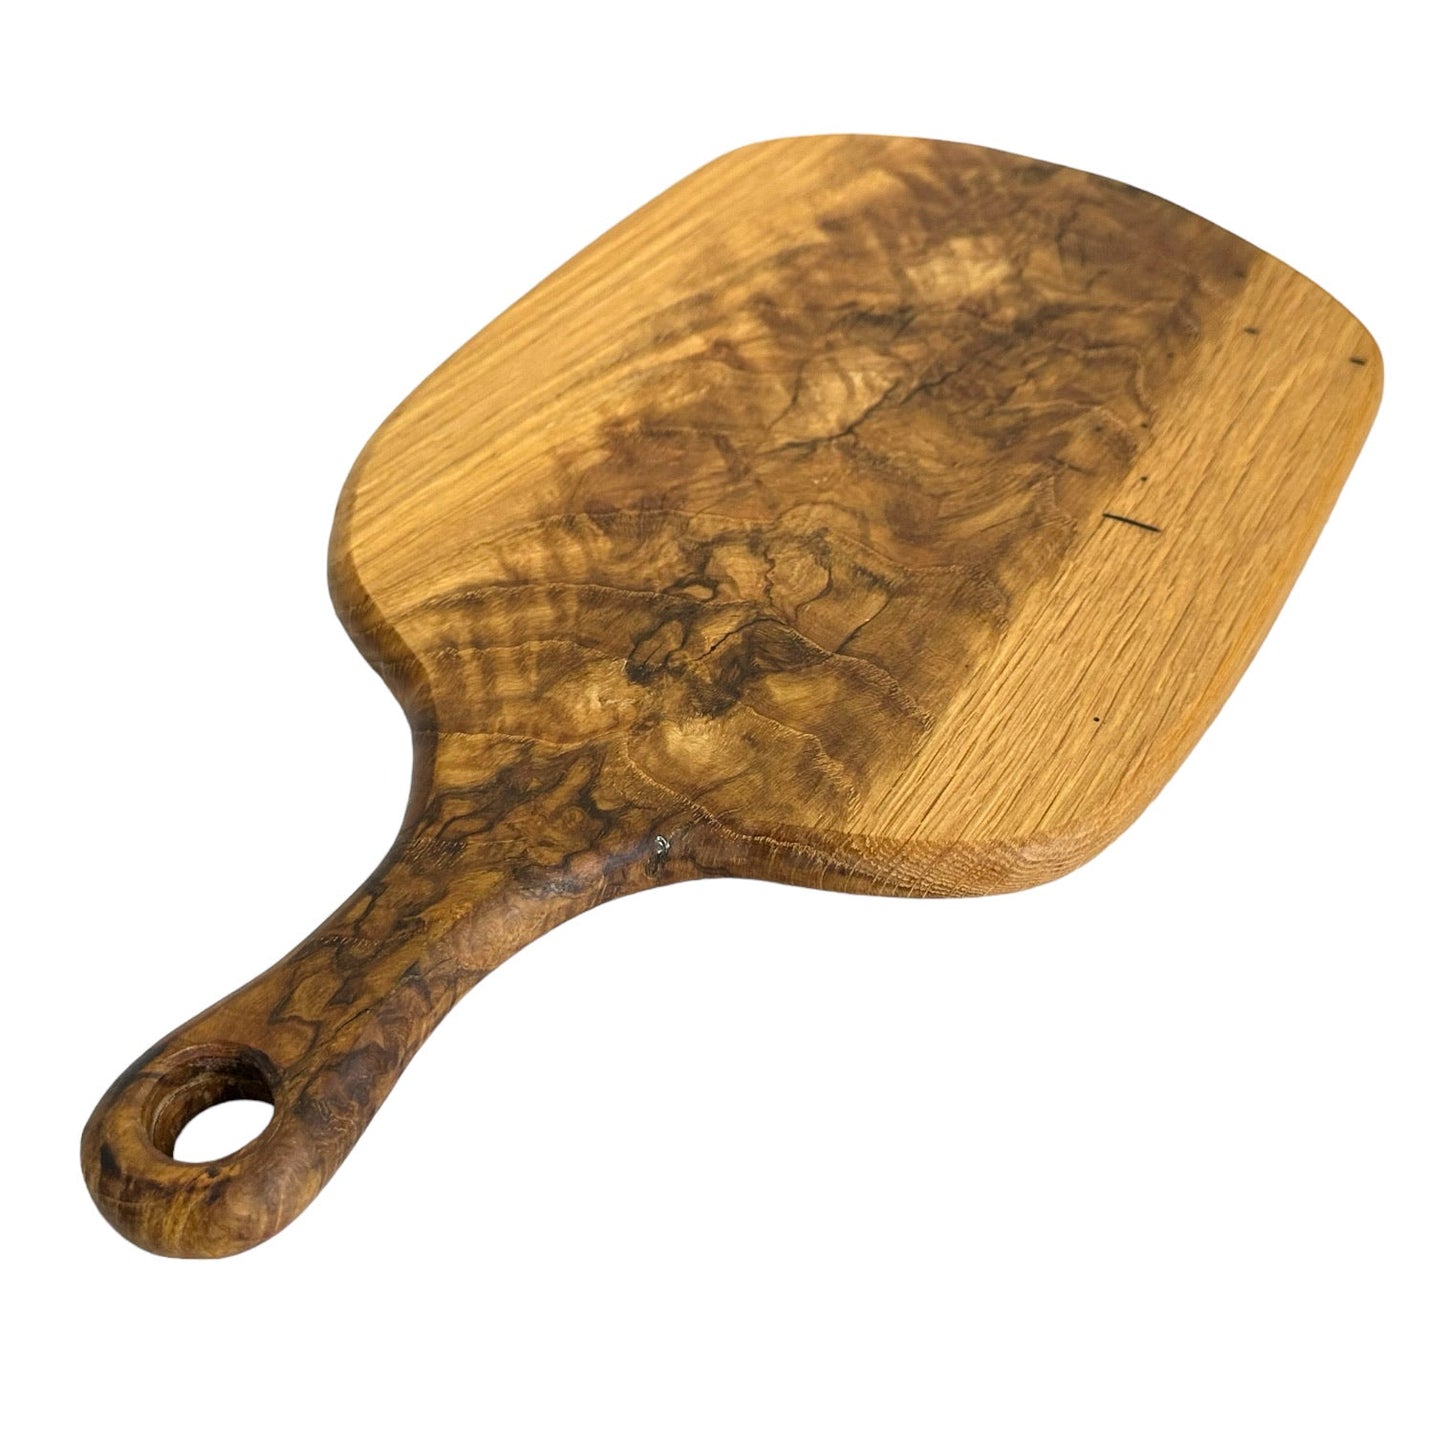 Rustic Oak - Handmade Wooden Charcuterie Boards - RTS style 1 handle detail view